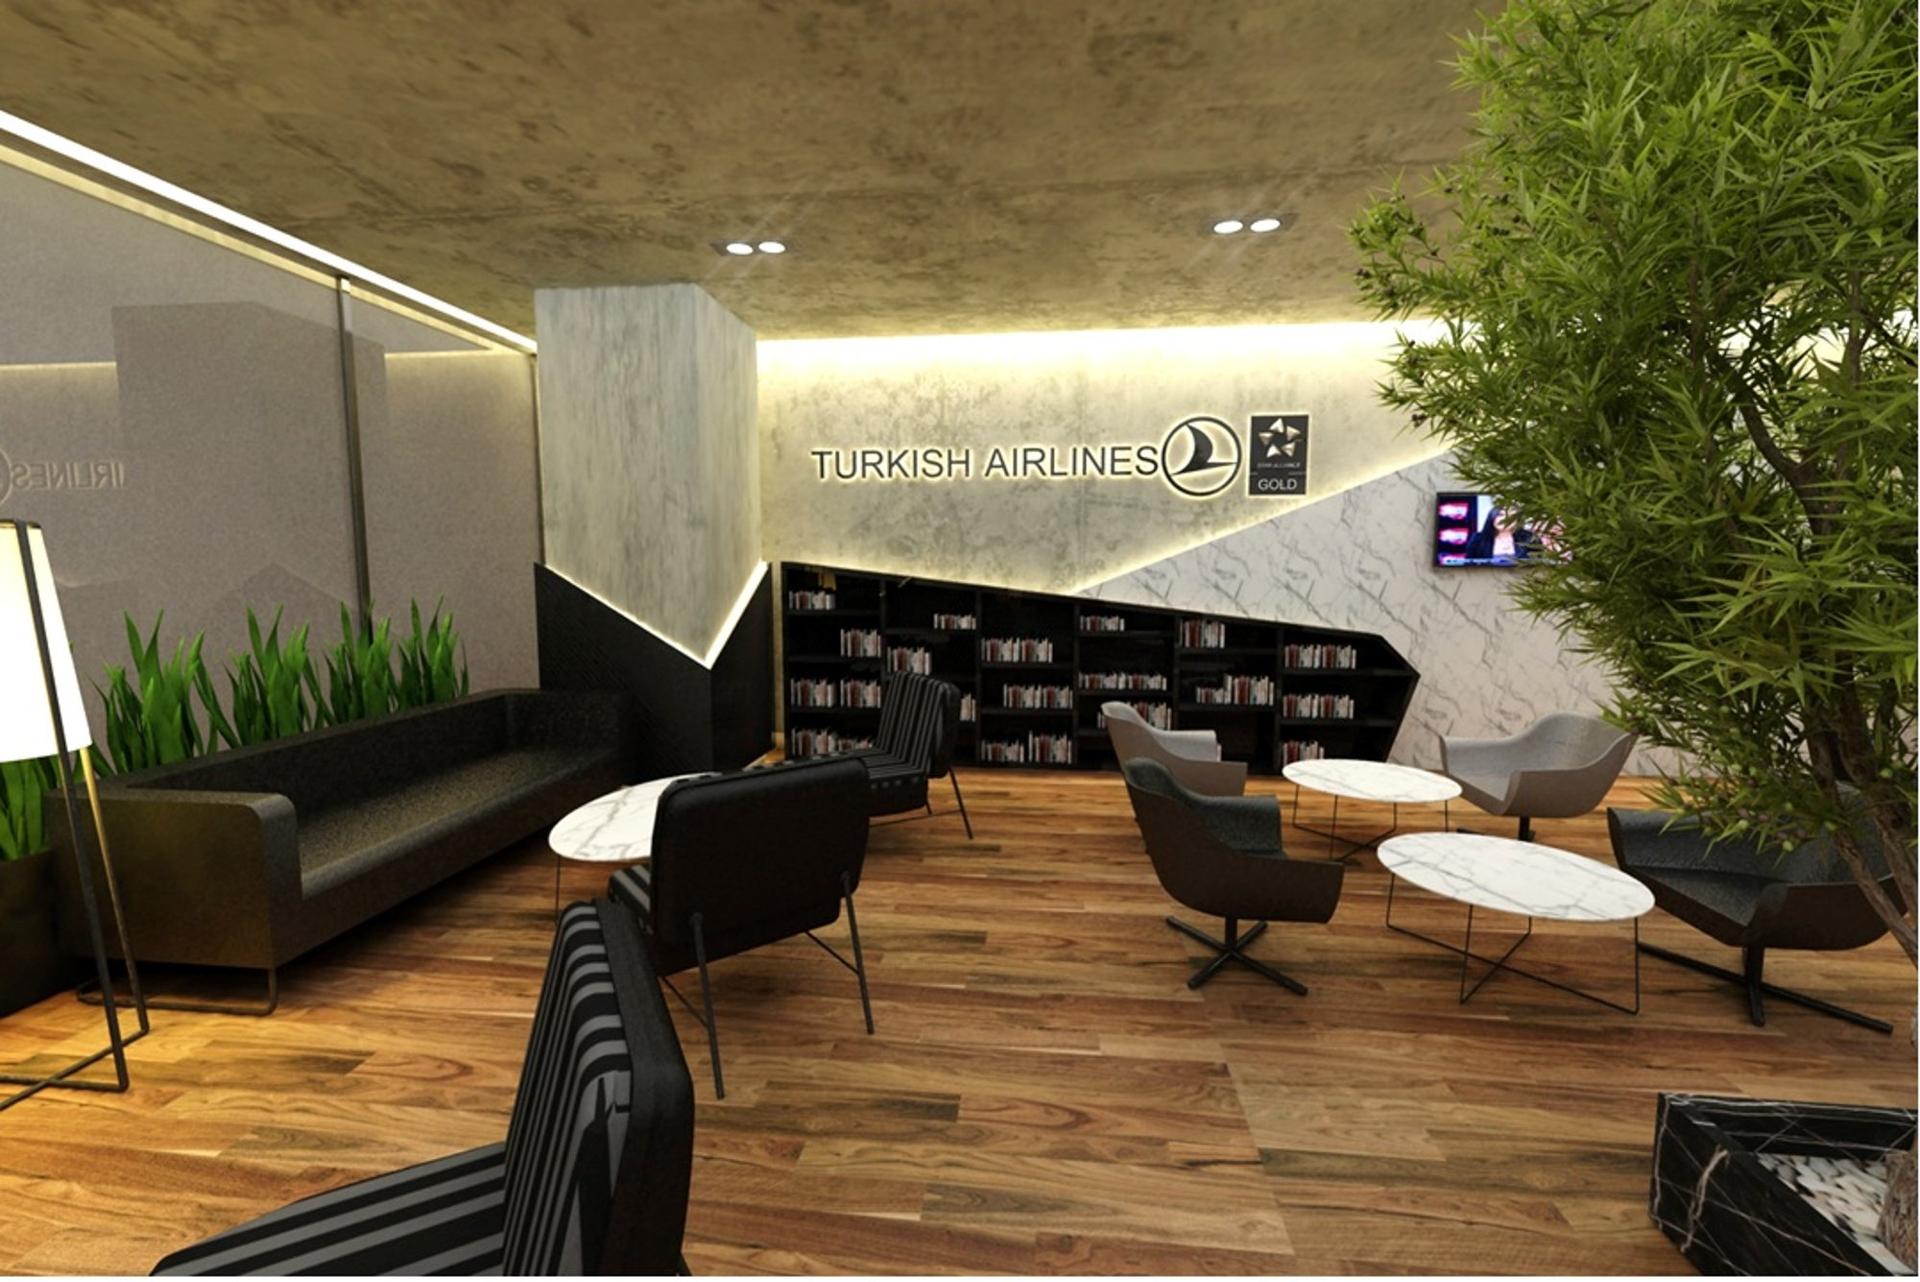 Turkish Airlines CIP Lounge (Business Lounge) image 27 of 27